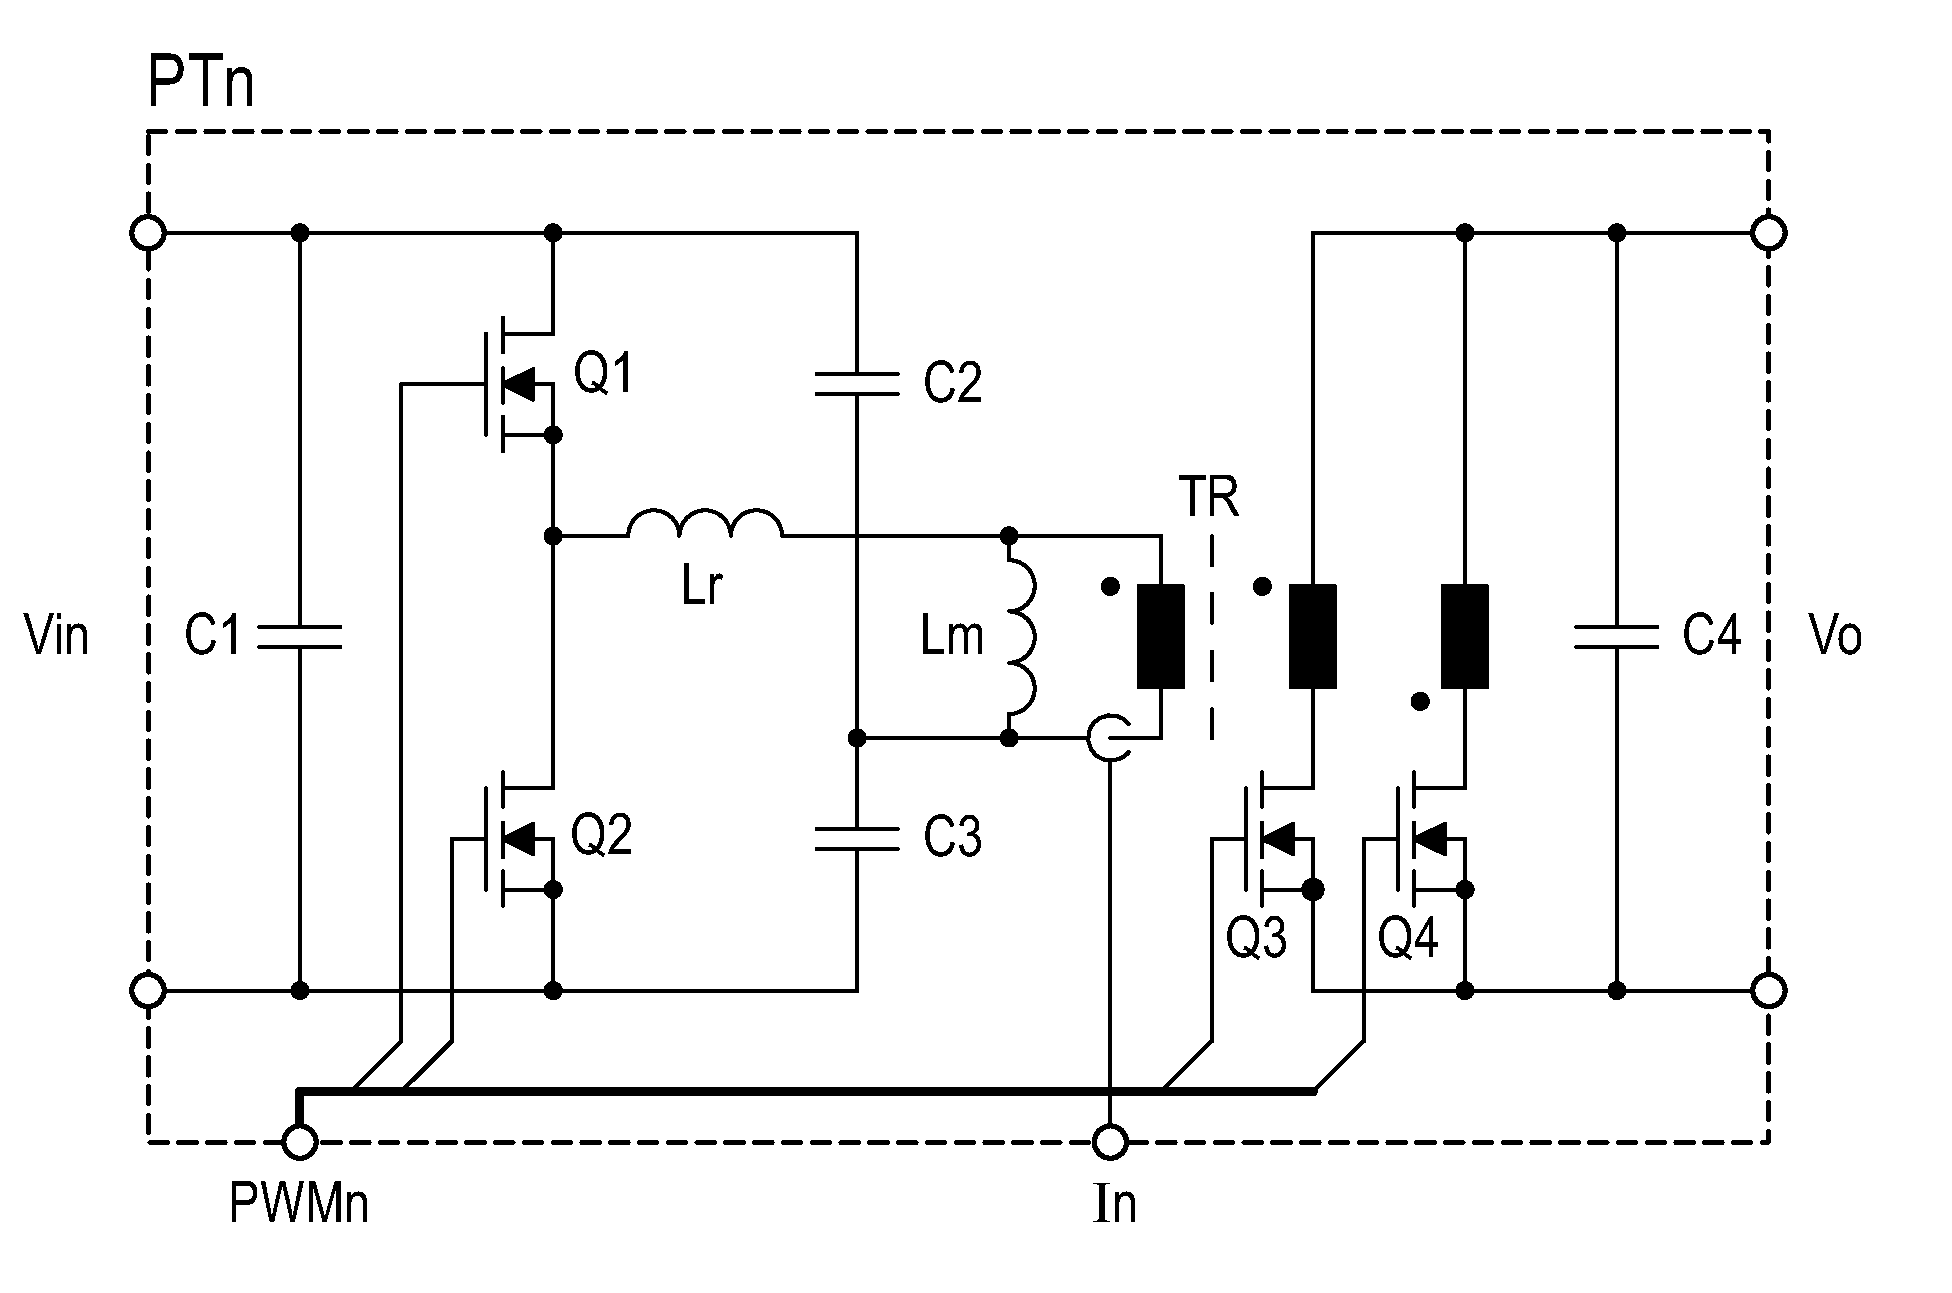 Multiphase converter with active and passive internal current sharing